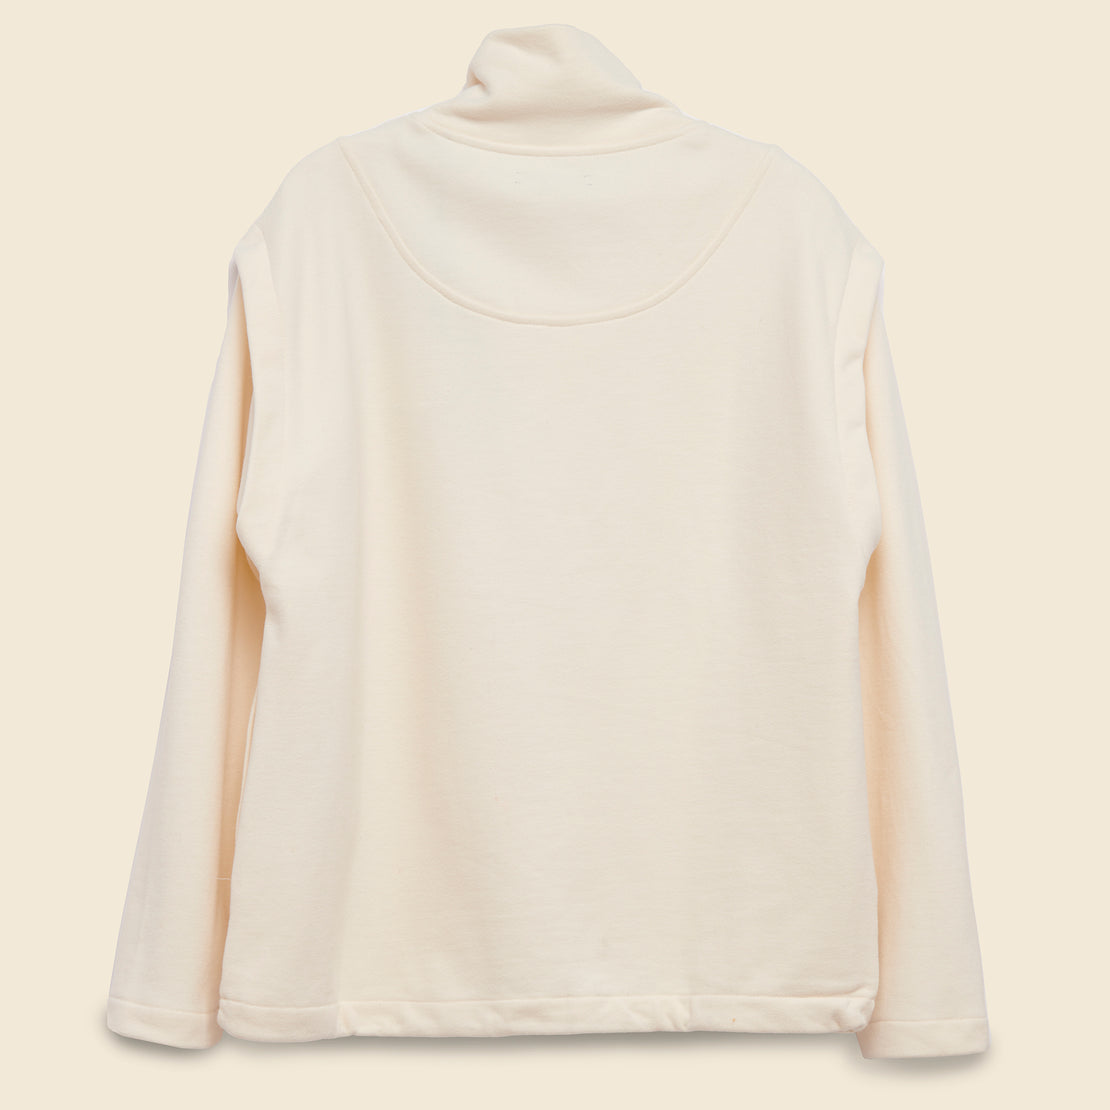 Fireside Fleece Pullover - Sunny Cream - Levis Made & Crafted - STAG Provisions - W - Tops - L/S Fleece